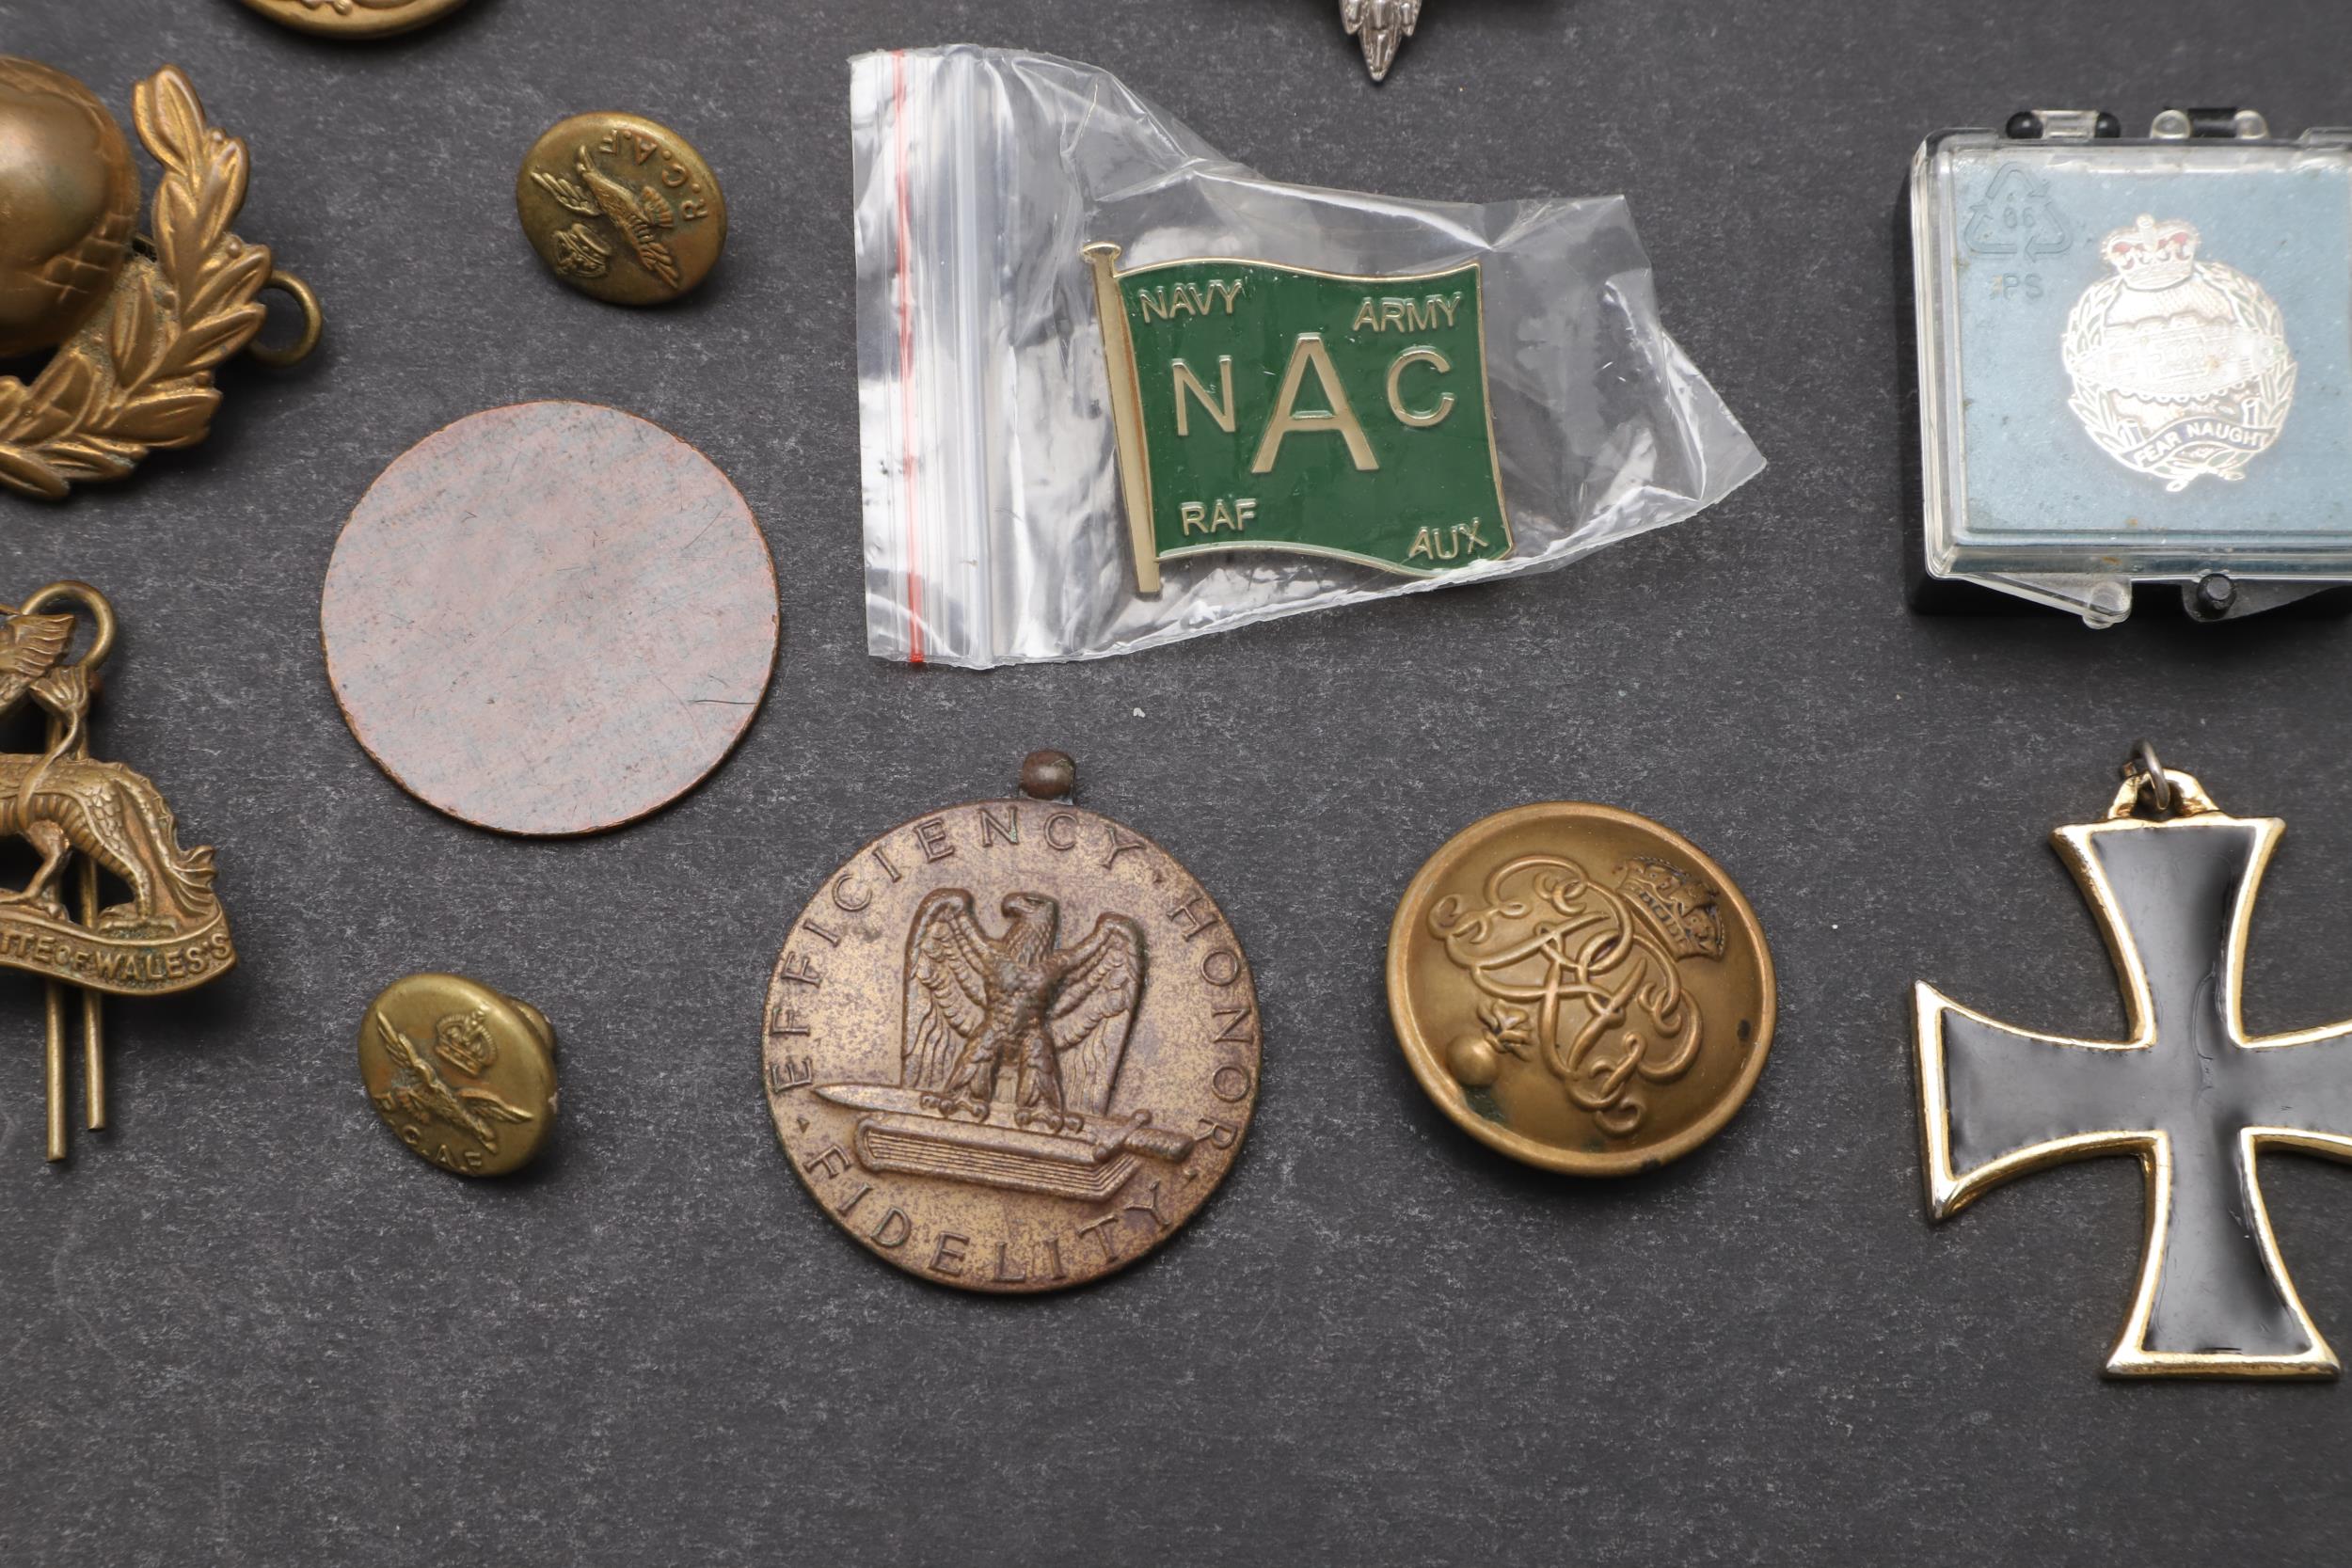 AN INTERESTING COLLECTION OF MILITARY BADGES, BUTTONS AND INSIGNIA. - Image 7 of 9